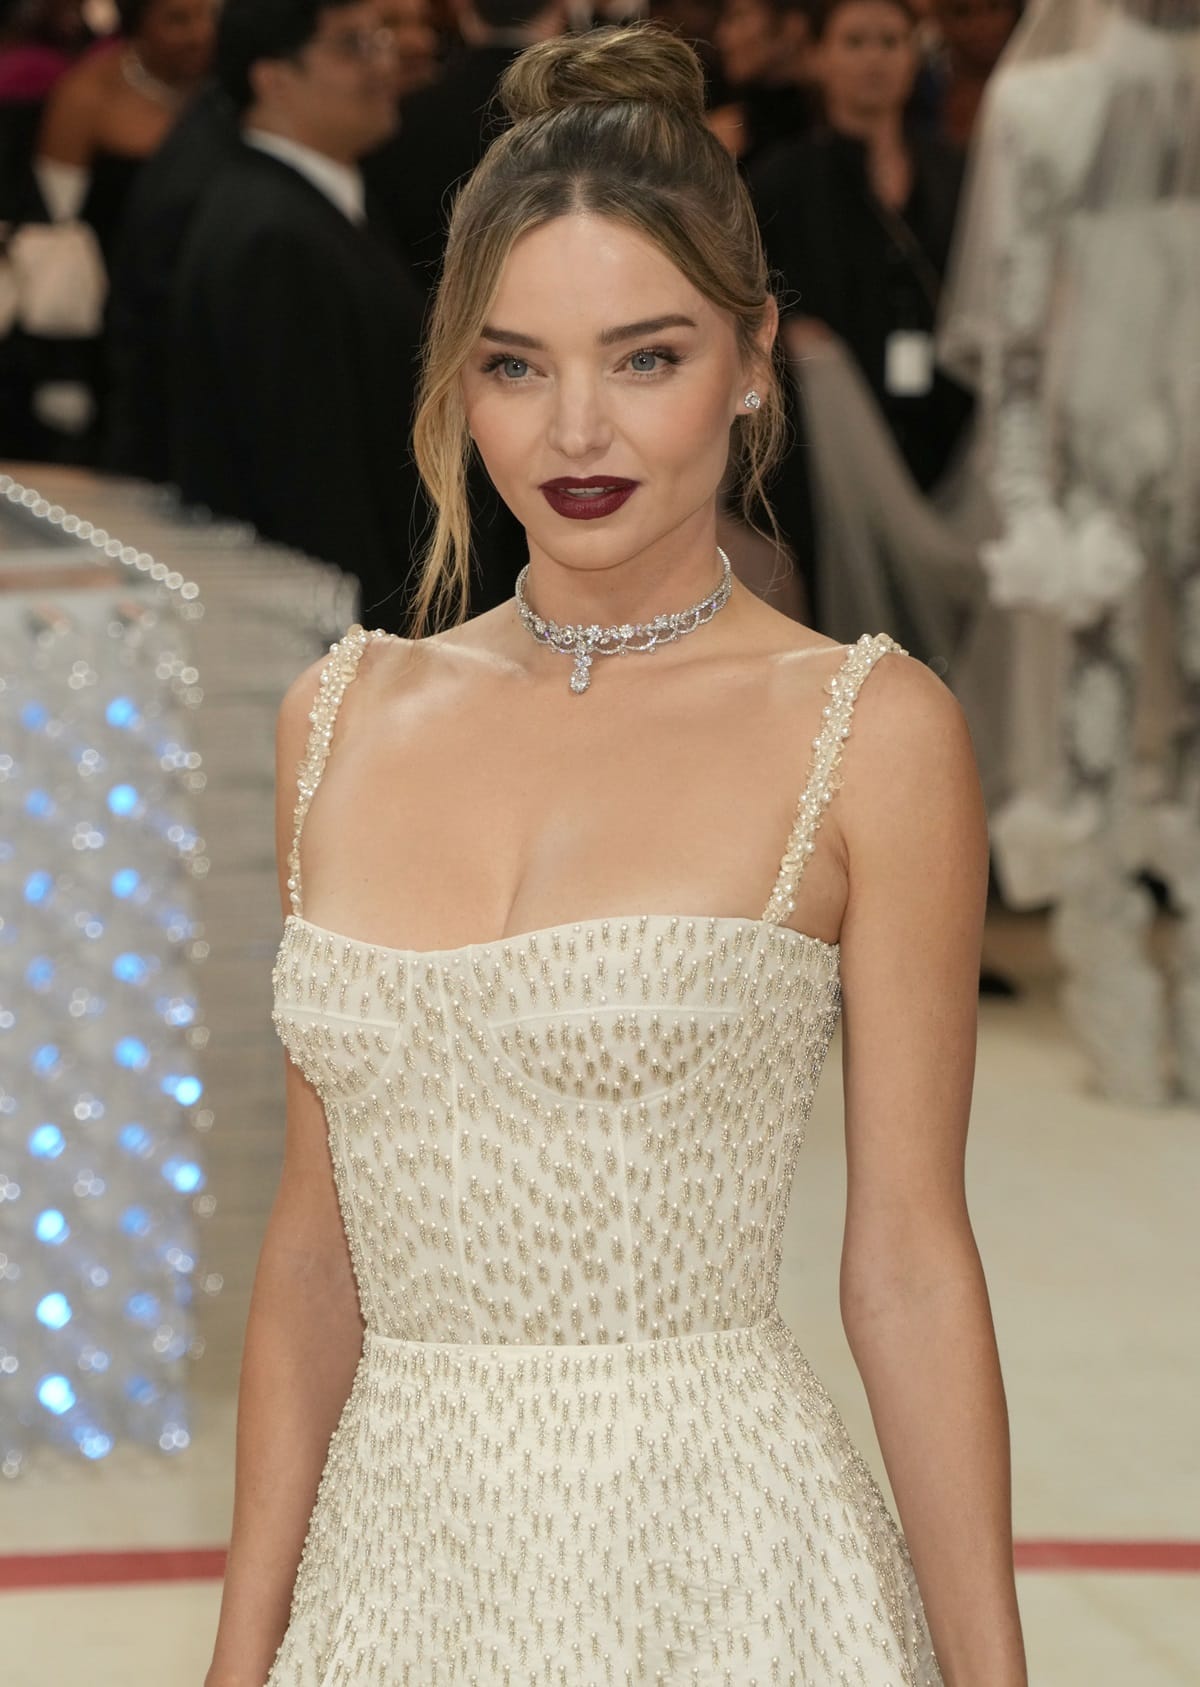 Miranda Kerr exuded timeless beauty in a mesmerizing Dior Haute Couture ensemble featuring a jewel-strap bustier and a necklace crafted in white gold and adorned with diamonds